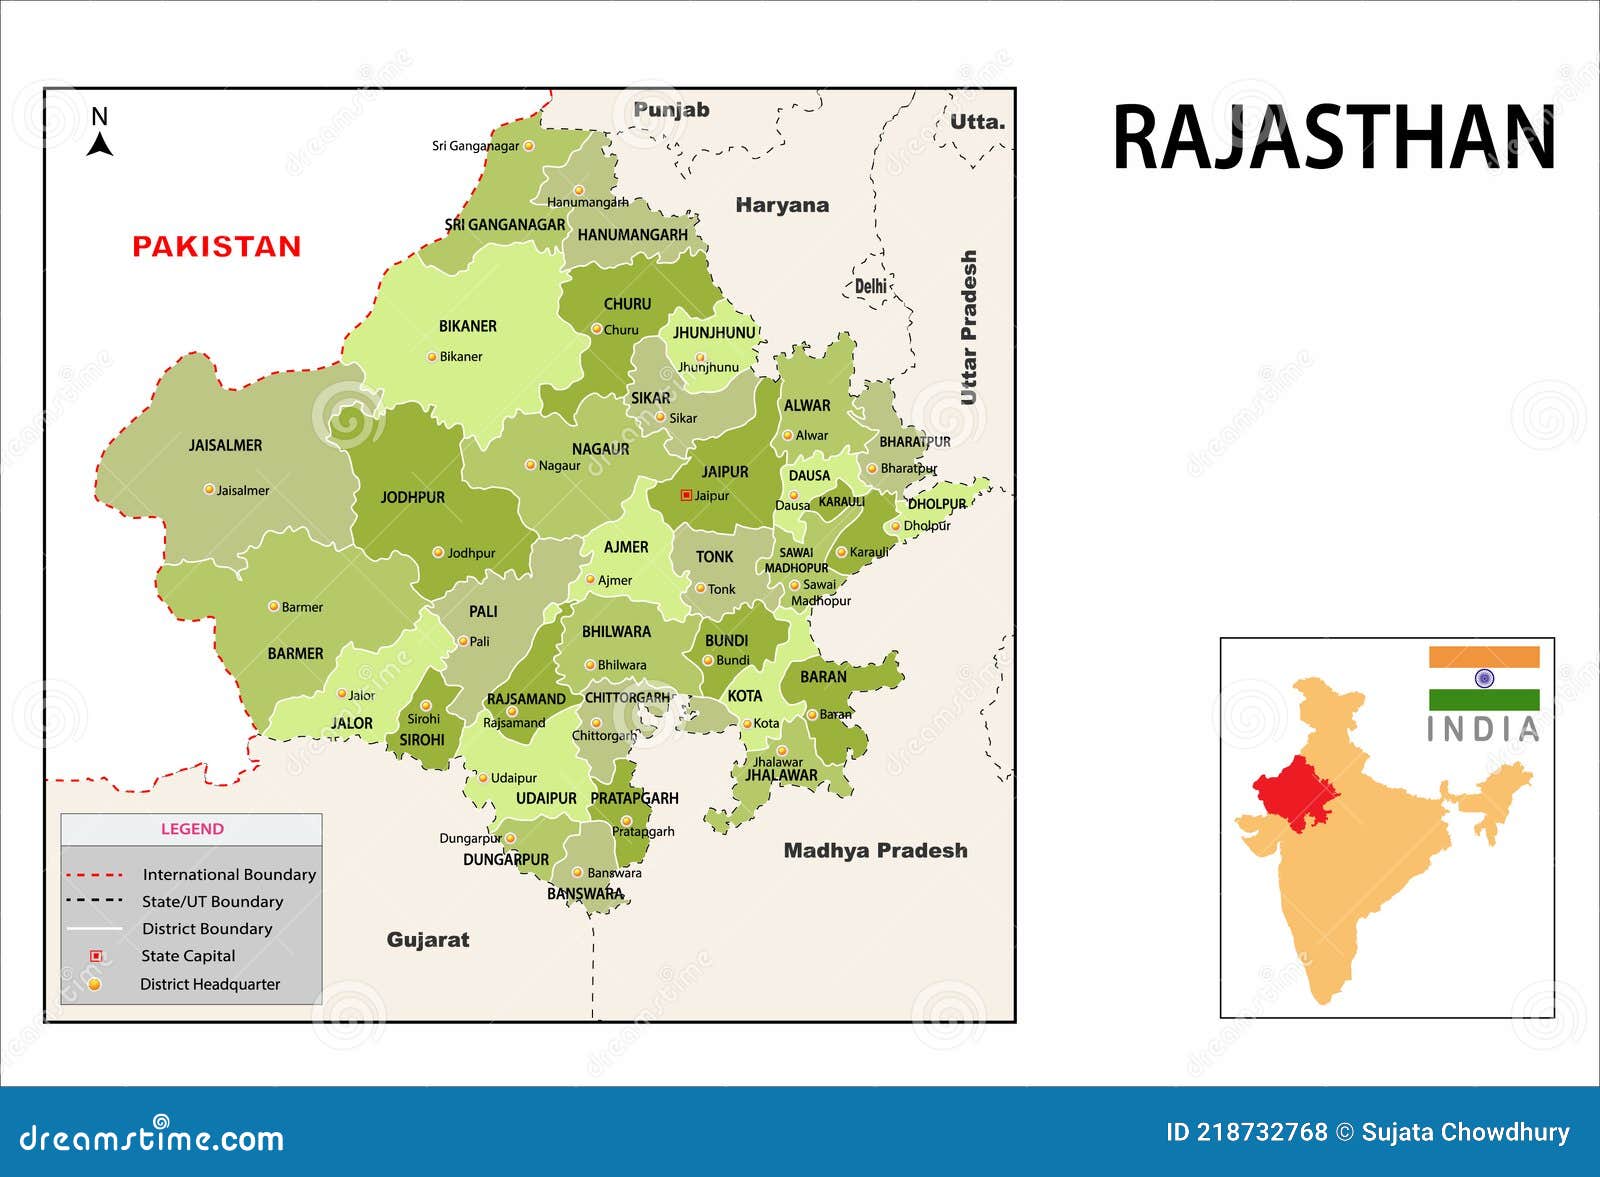 Rajasthan Map. Political and Administrative Map of Rajasthan with